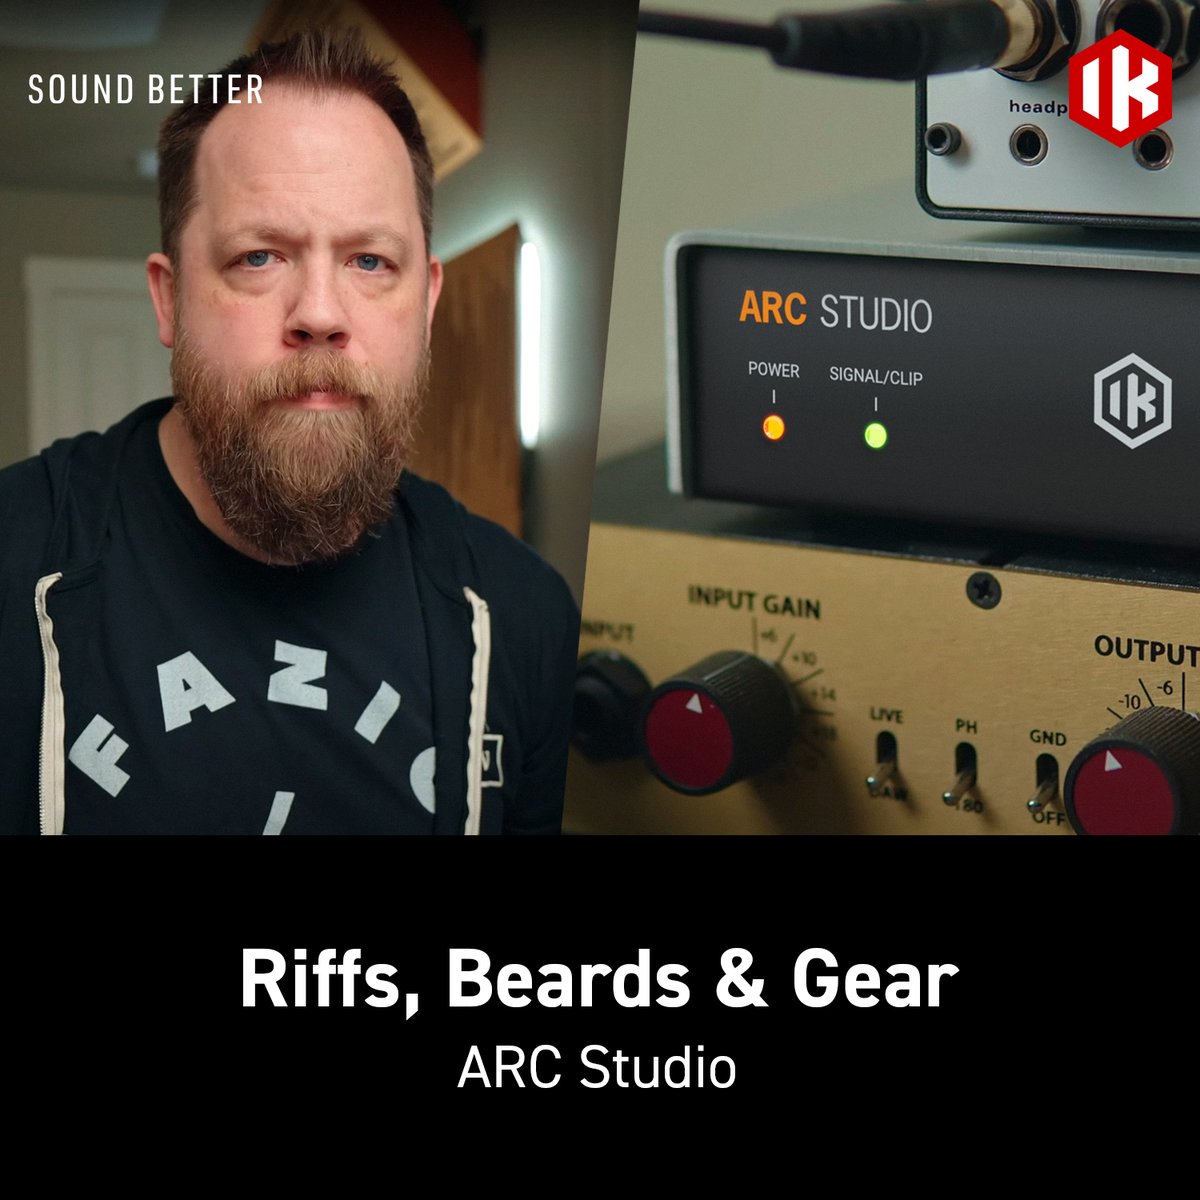 ICYMI: @RiffsAndBeards discusses how ARC Studio analyzes the acoustic issues in your listening environment and can be the solution you'e been looking for. bit.ly/fluffarcstudio